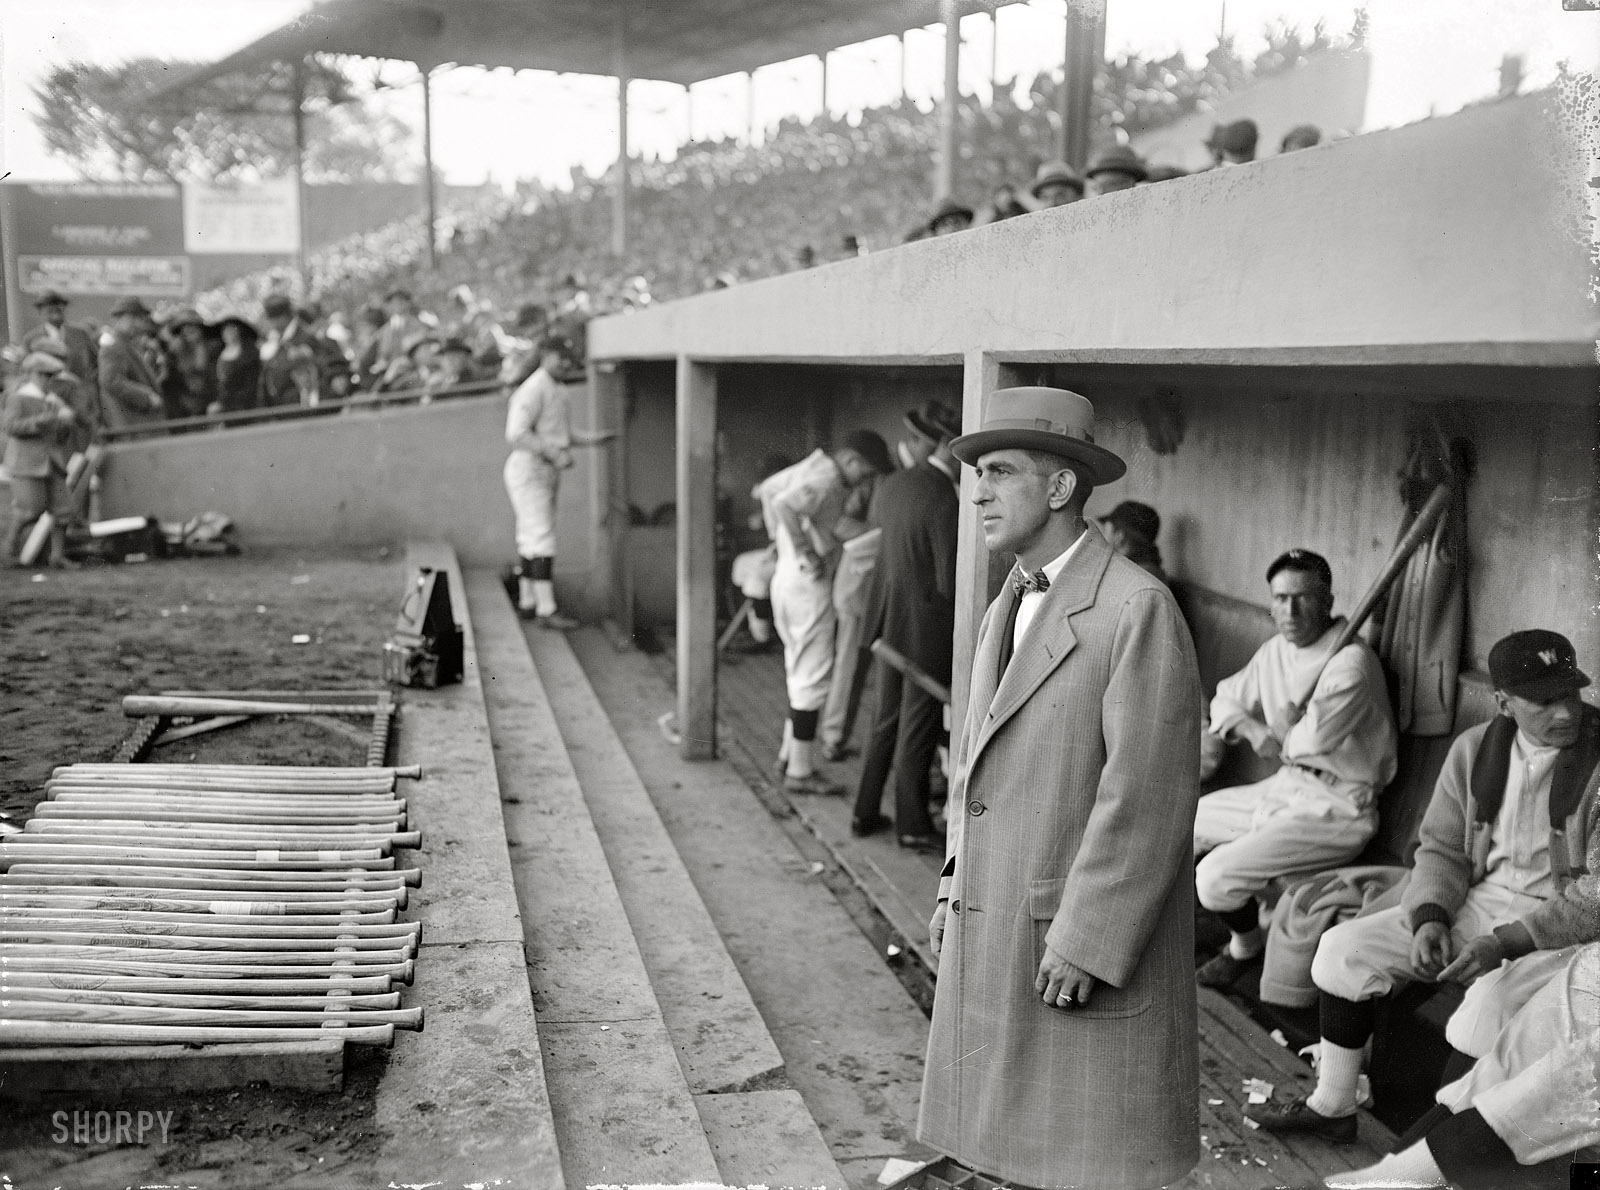 October 10, 1924. Griffith Stadium in Washington, D.C. "Peckinpaugh sees final World Series game from dugout on account of injuries." View full size.